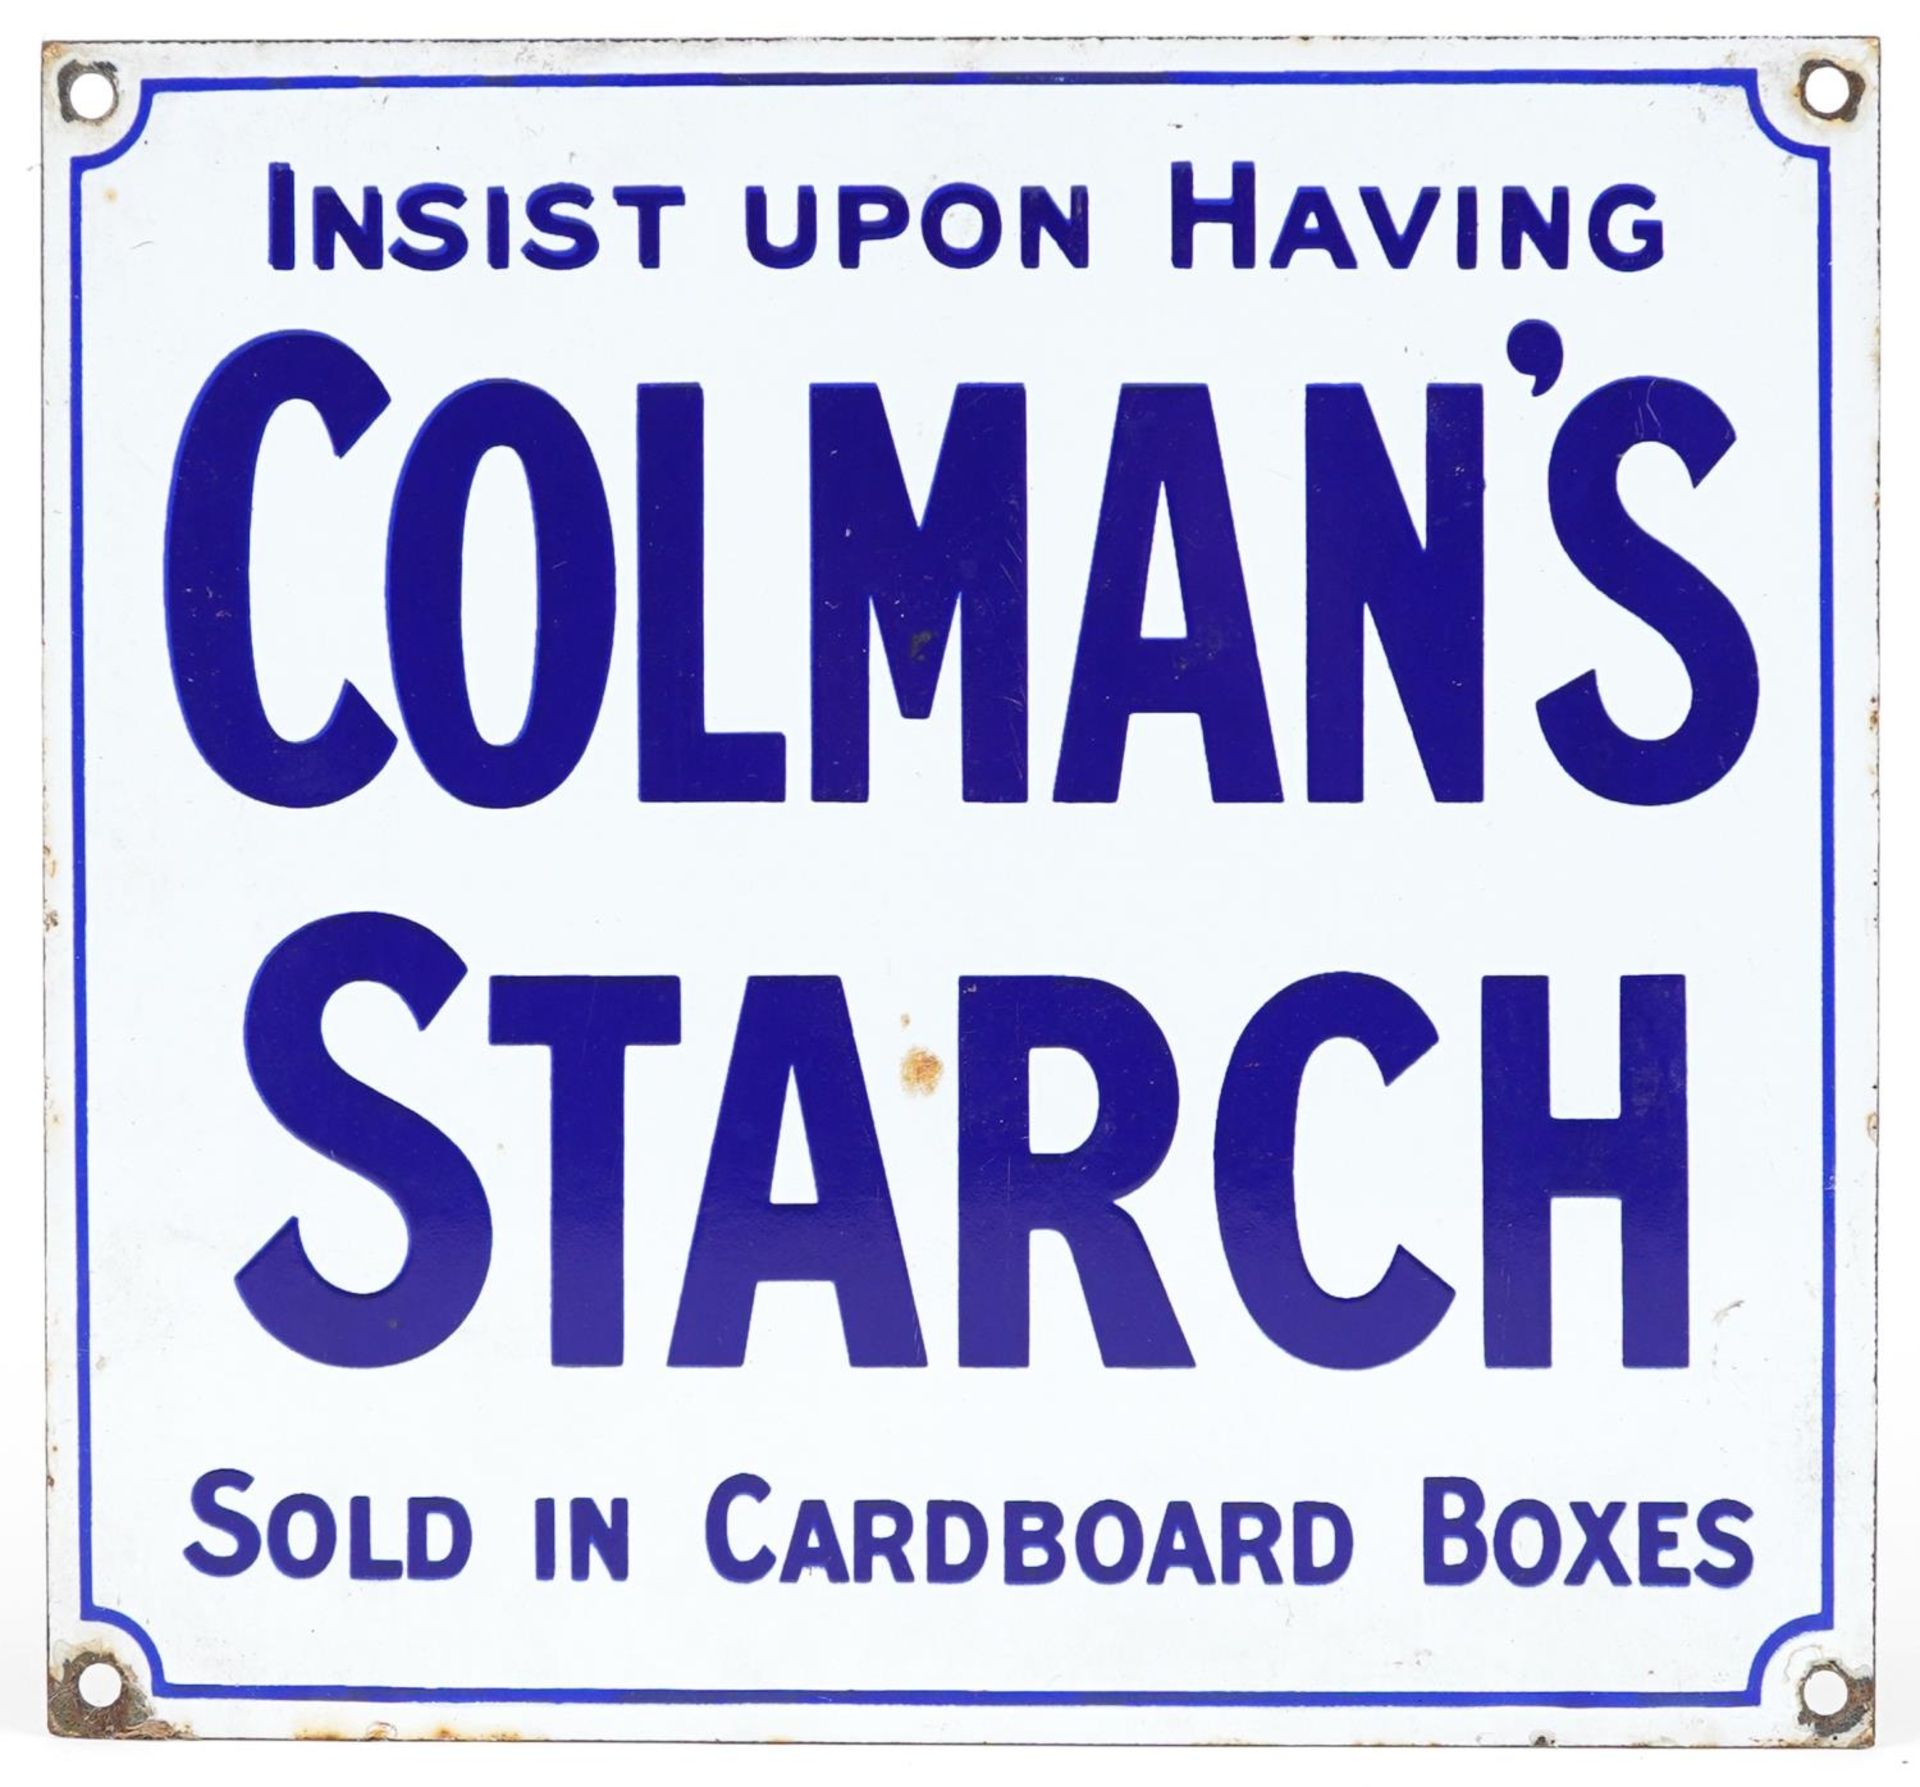 Colman's Starch enamel advertising sign inscribed Insist Upon Having Colman's Starch Sold in